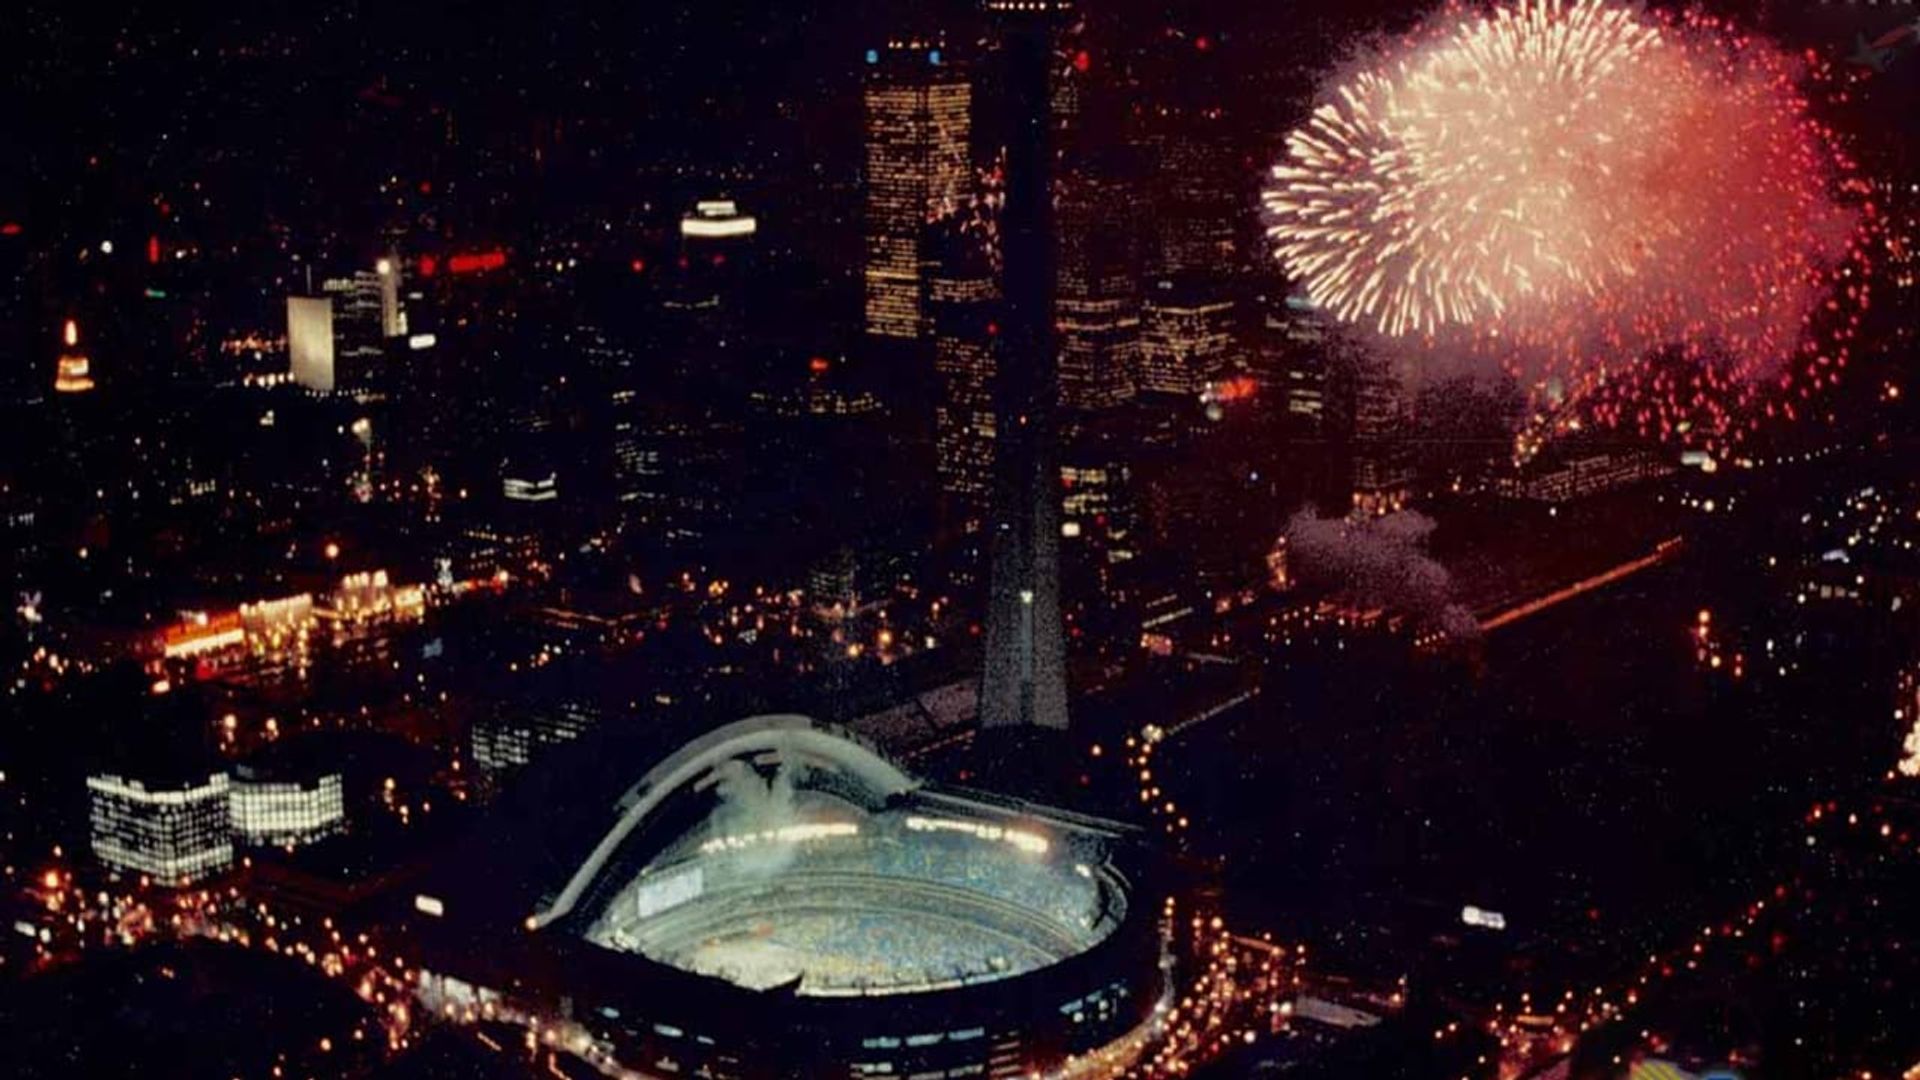 The Opening of SkyDome: A Celebration background